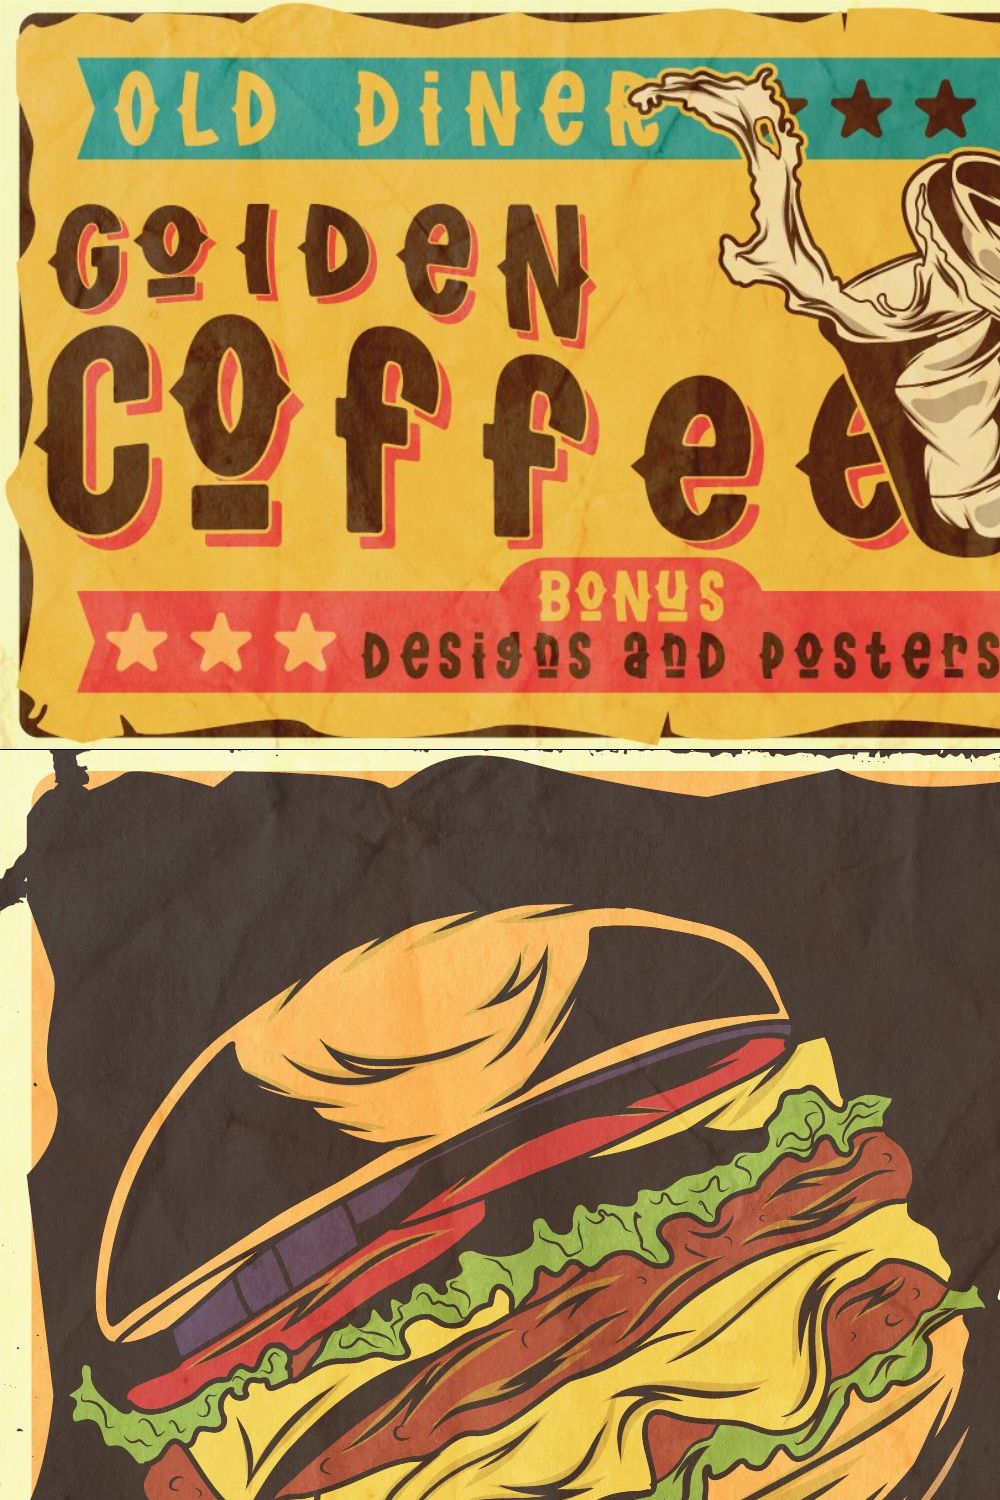 Golden coffee font, posters&designs pinterest preview image.